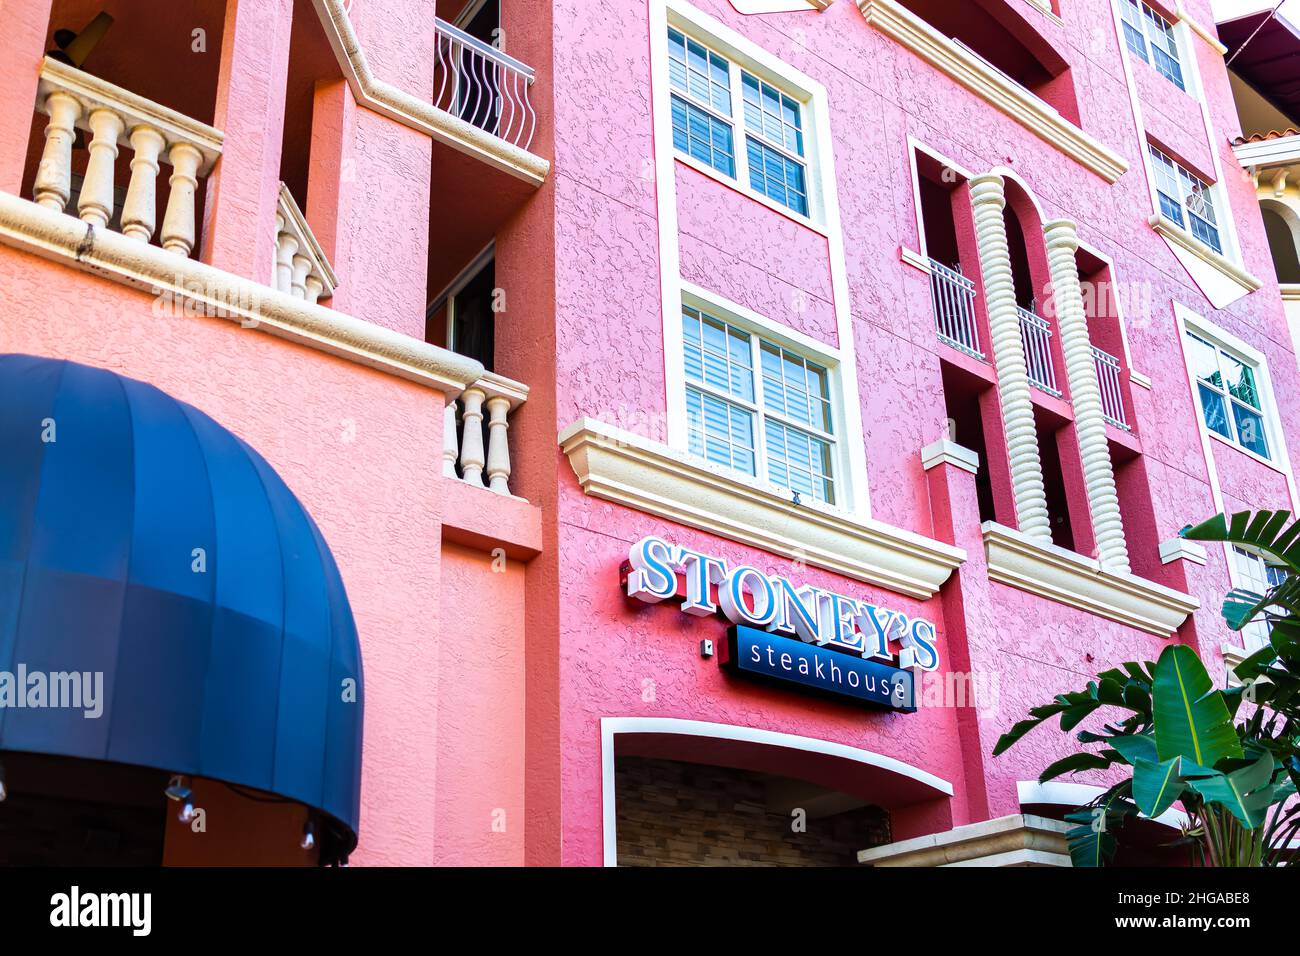 Naples, USA - September 13, 2021: Naples, Florida Bayfront condo colorful pink coral Spanish architecture building with sign for Stoney's restaurant s Stock Photo